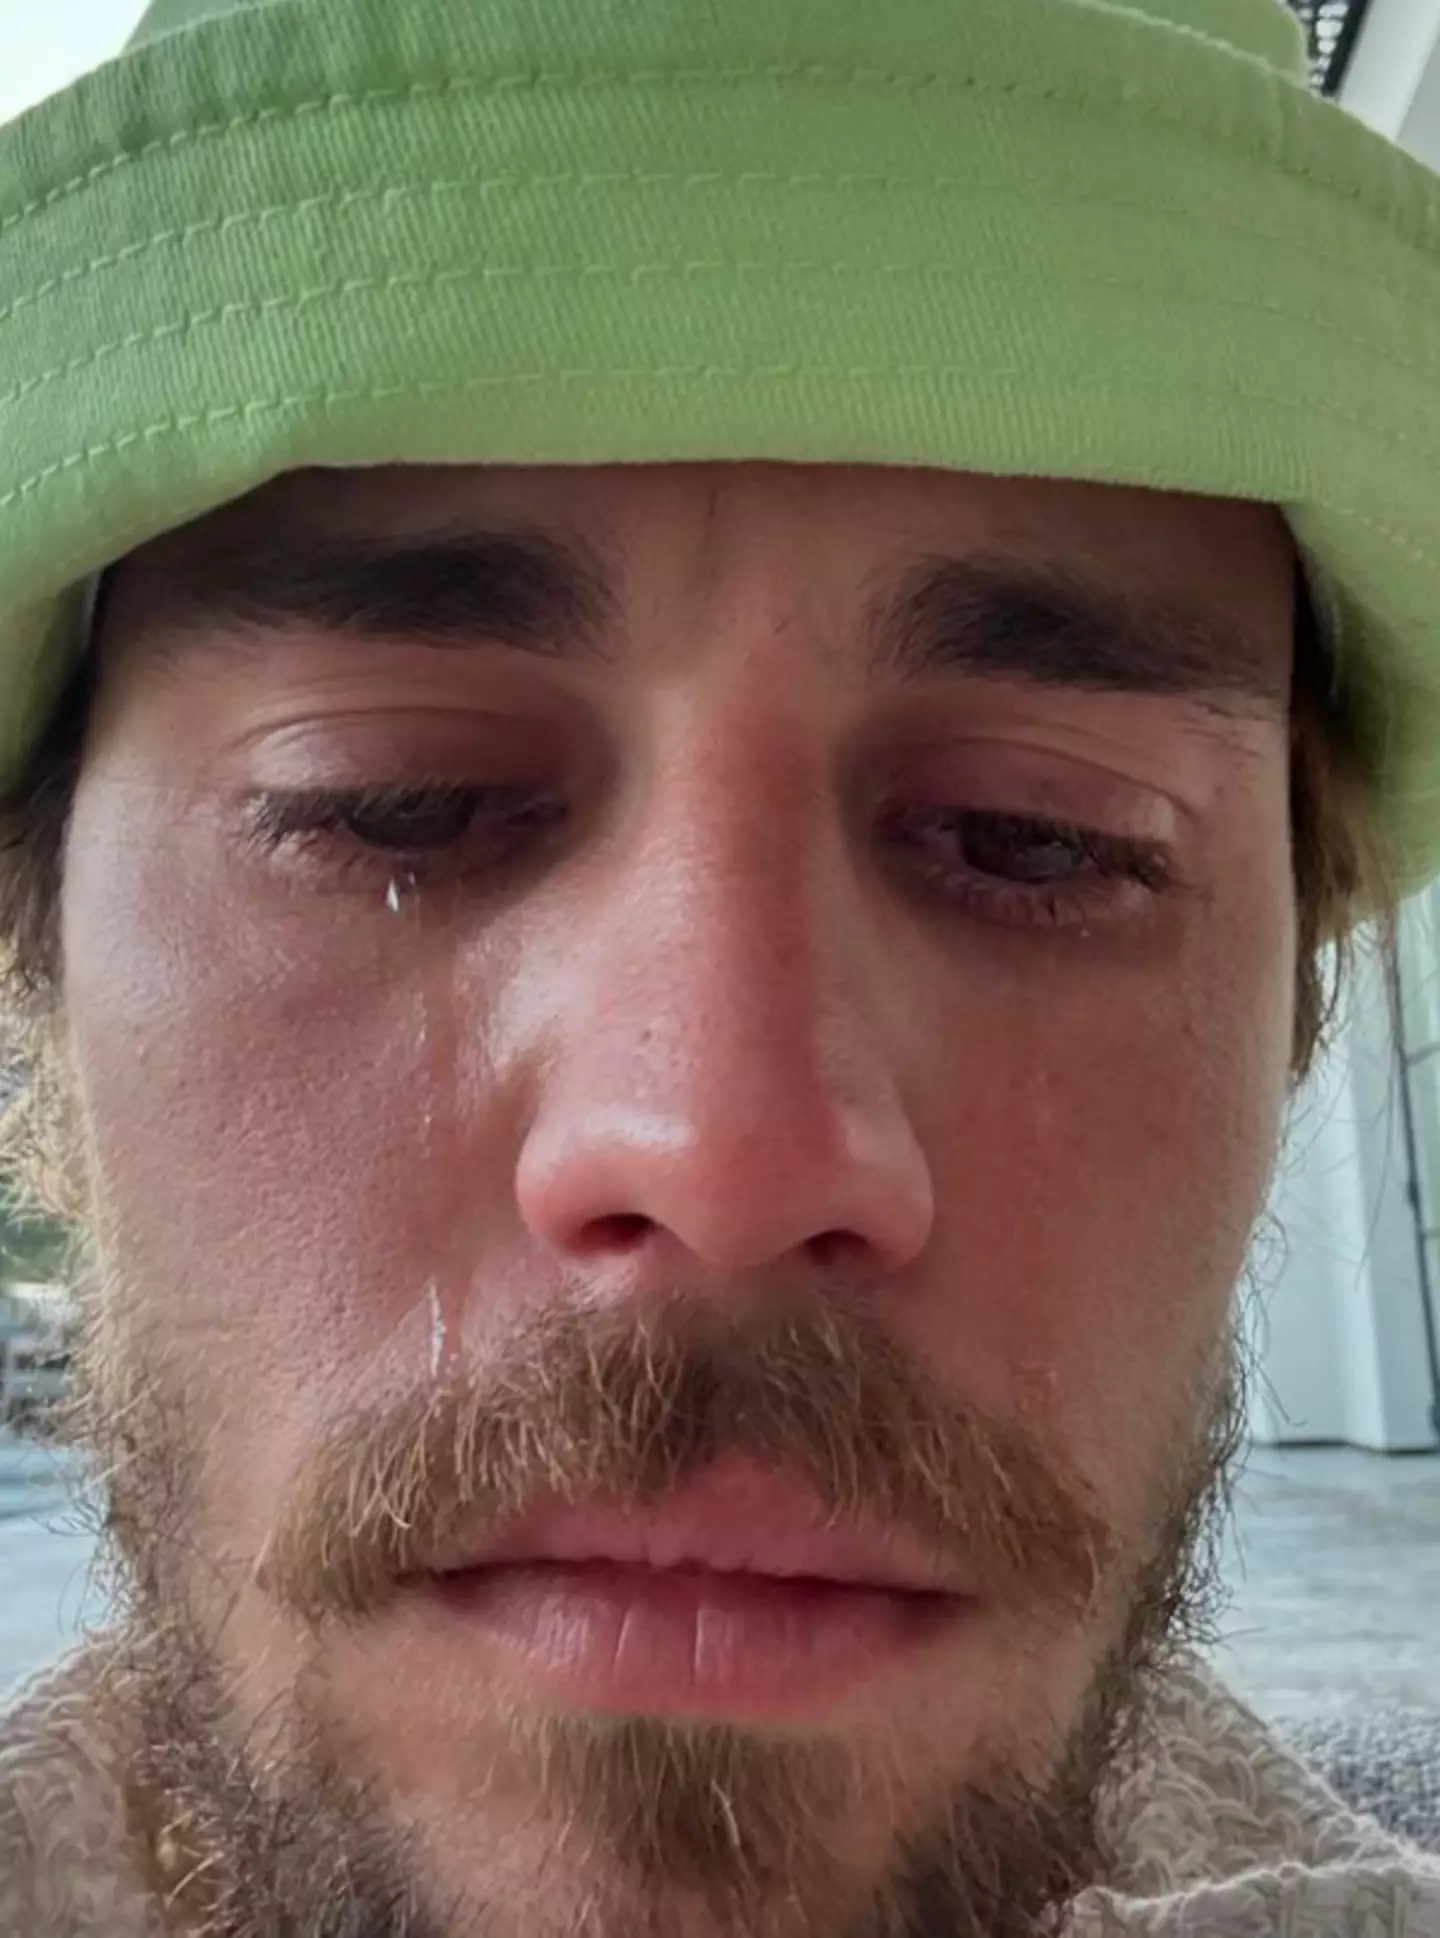 The crying selfie shocked and worried fans the other week. Instagram/ @justinbieber